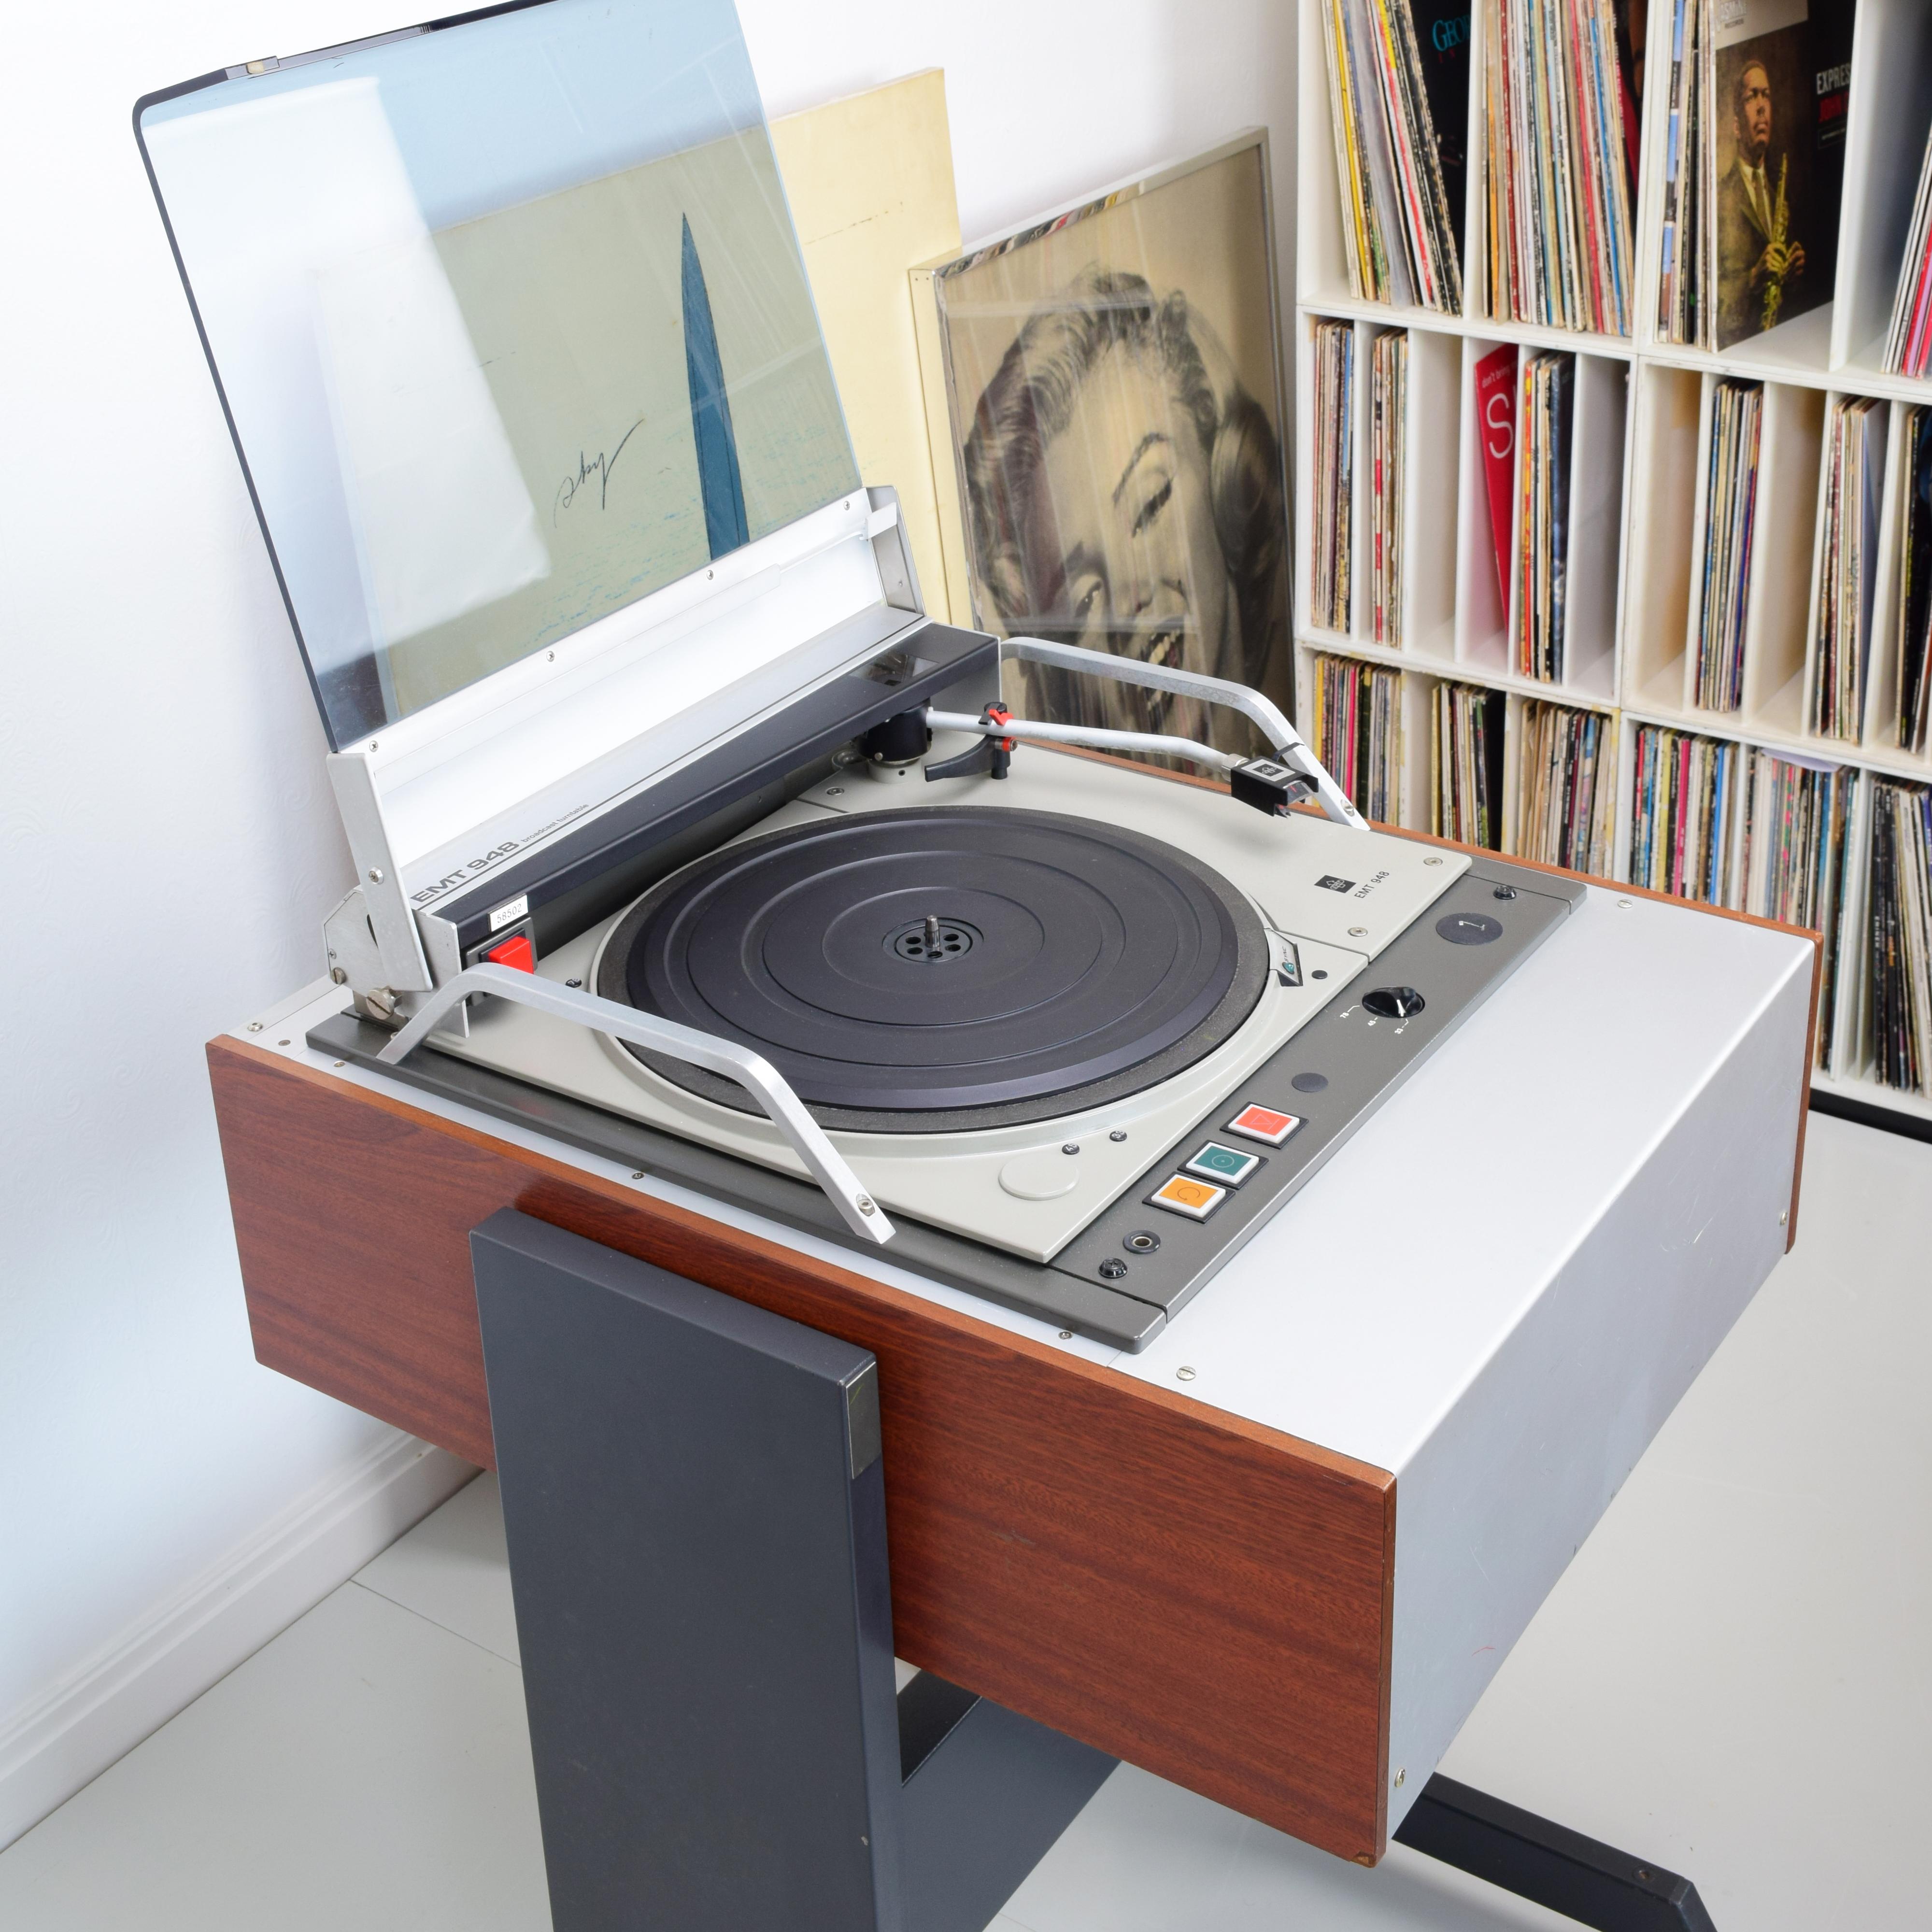 Industrial Emt 948 Turntable. Superb, Complete and Ready to Use, Looks and Sounds Fantastic